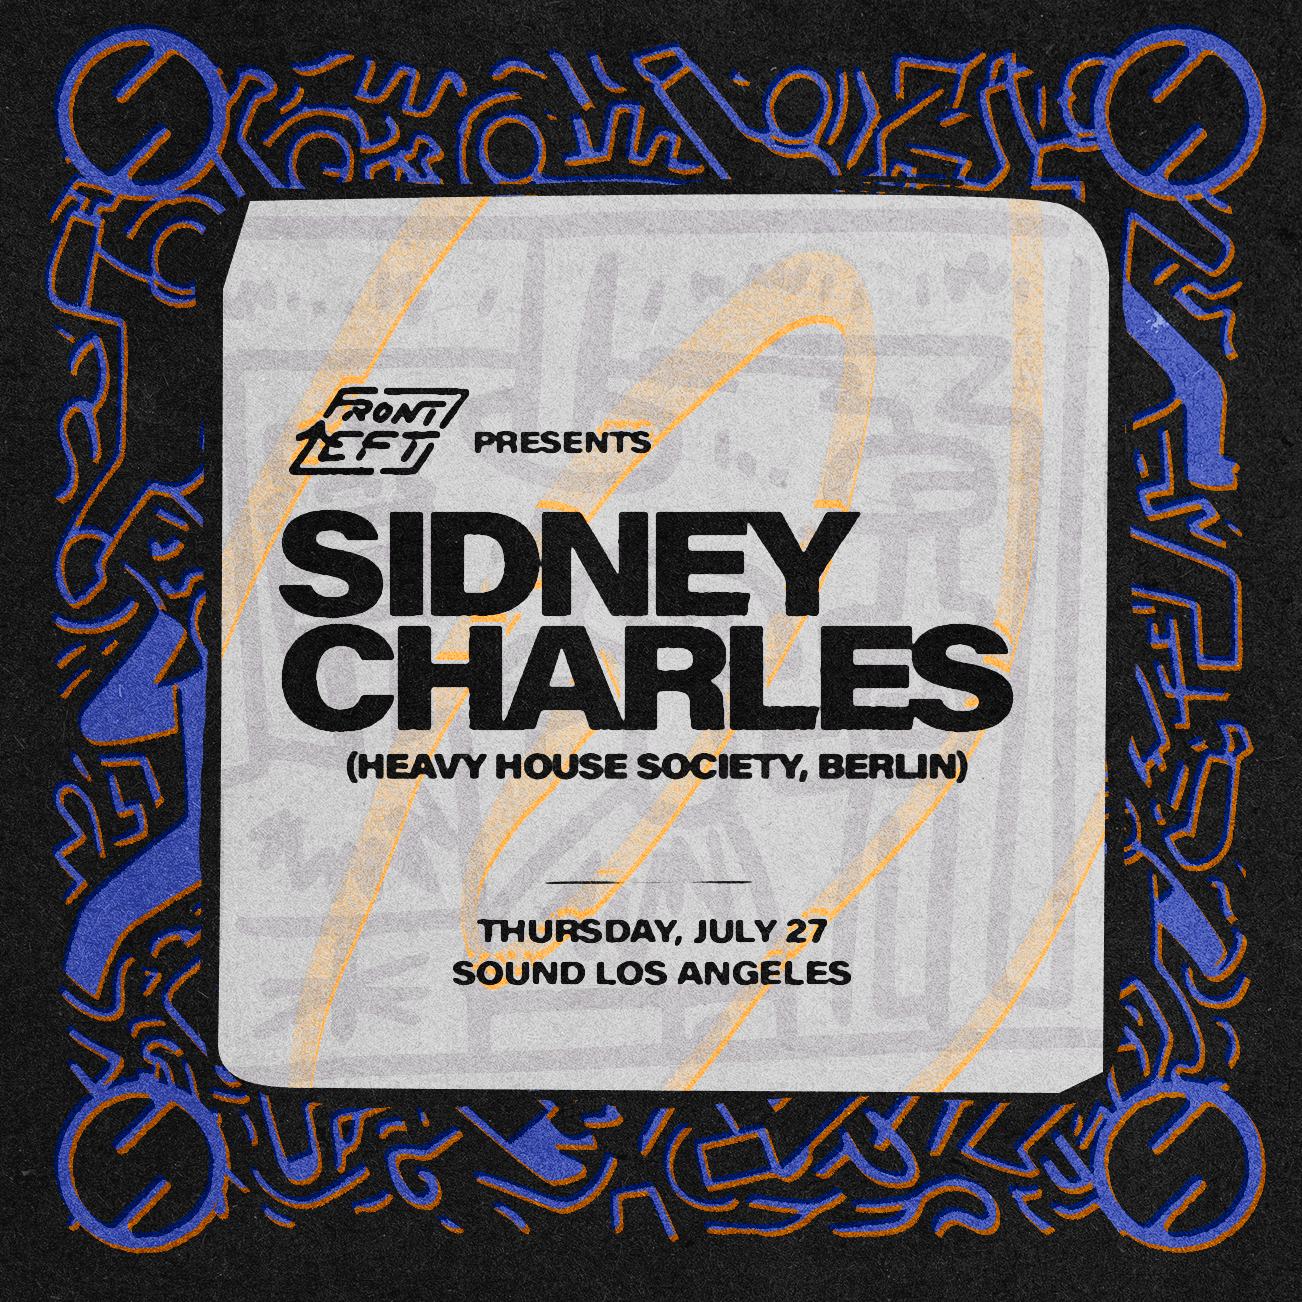 Front Left presents: Sidney Charles - フライヤー表